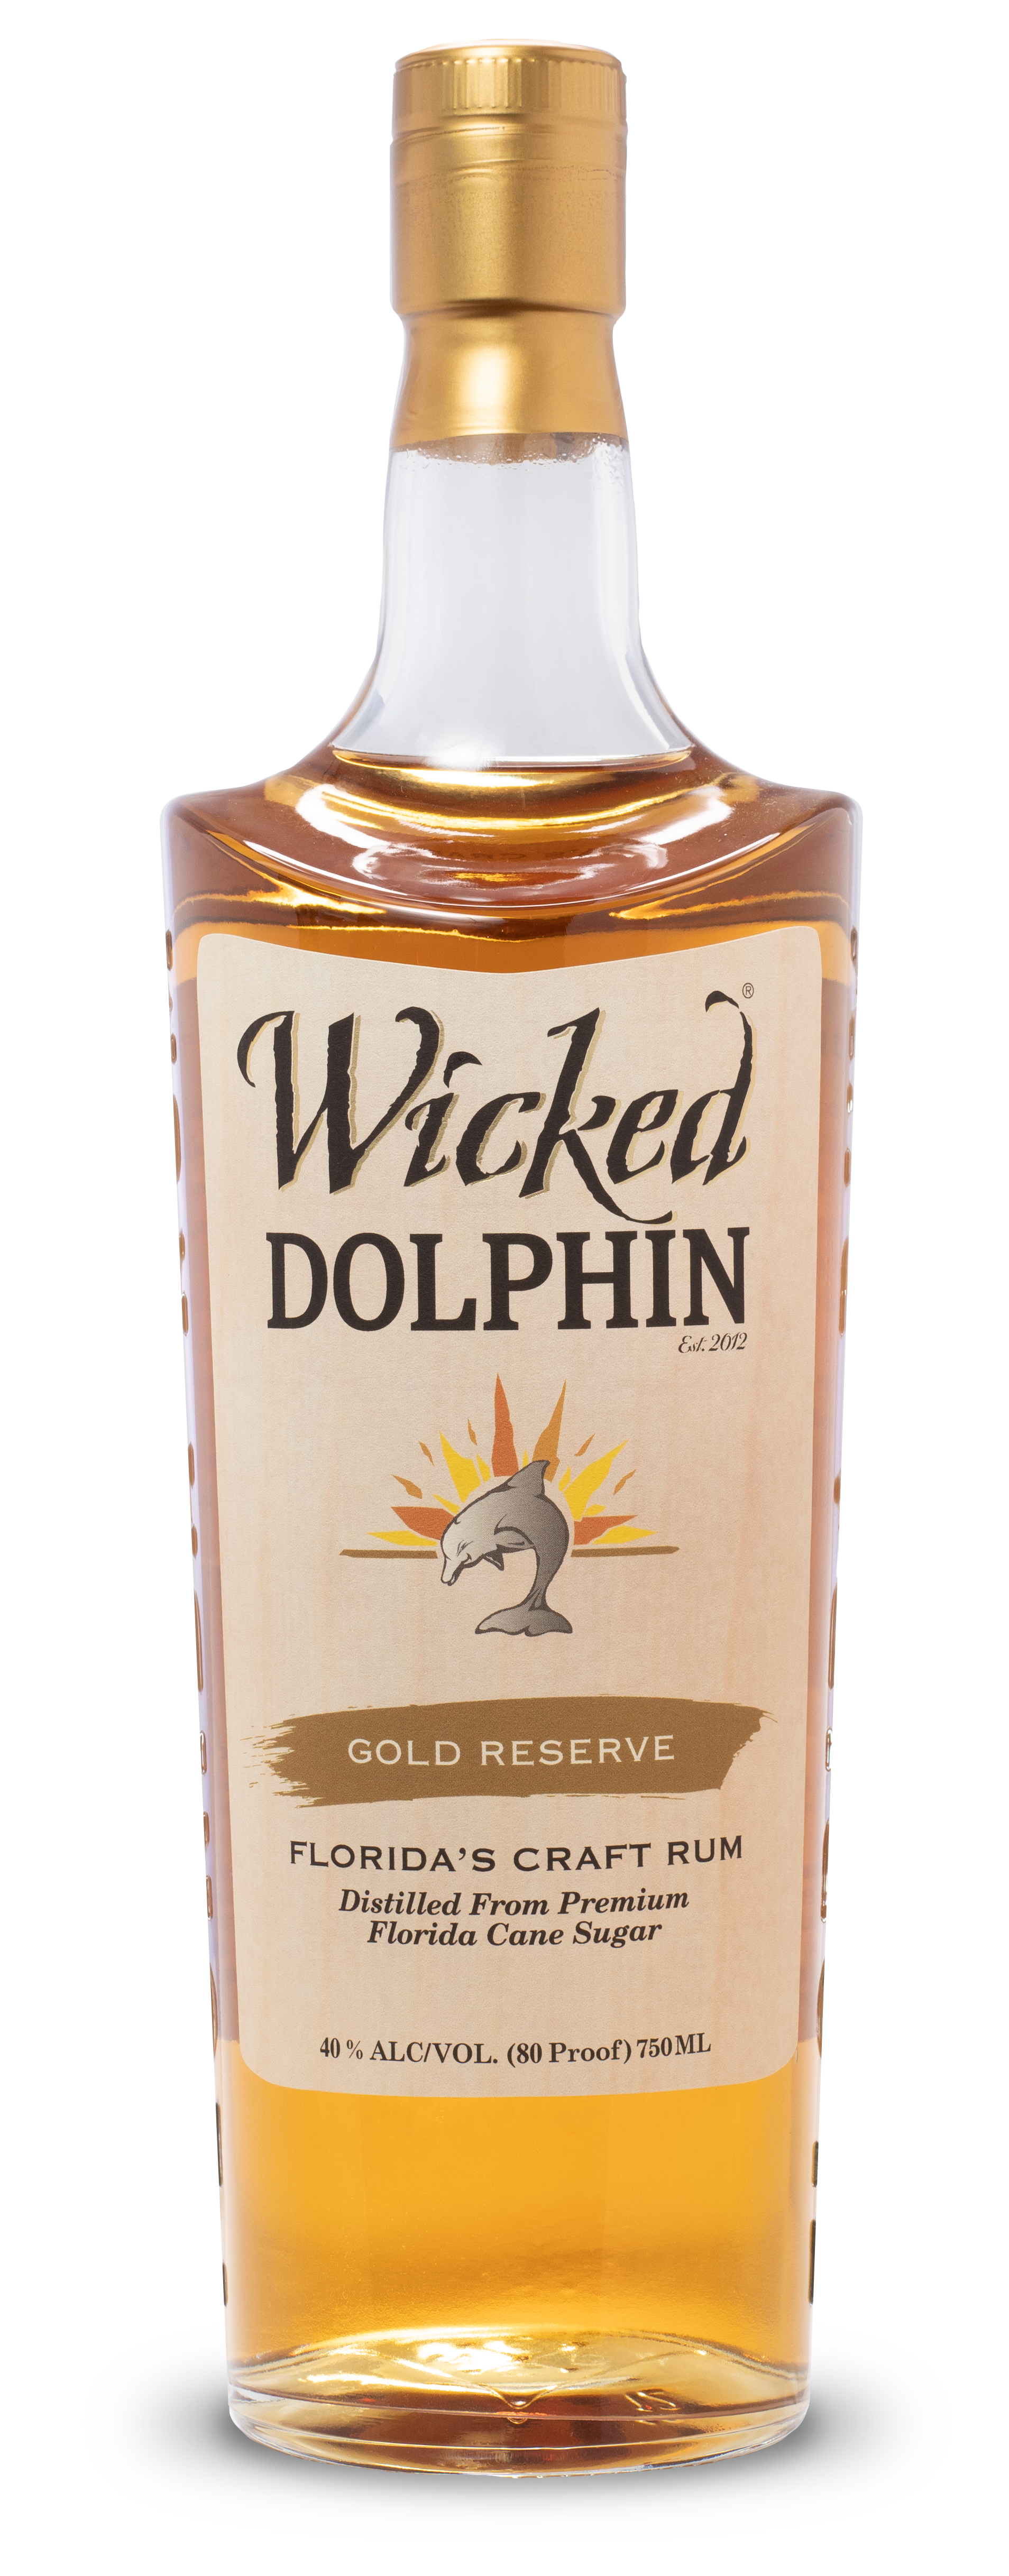 wicked dolphin gold reserve rum